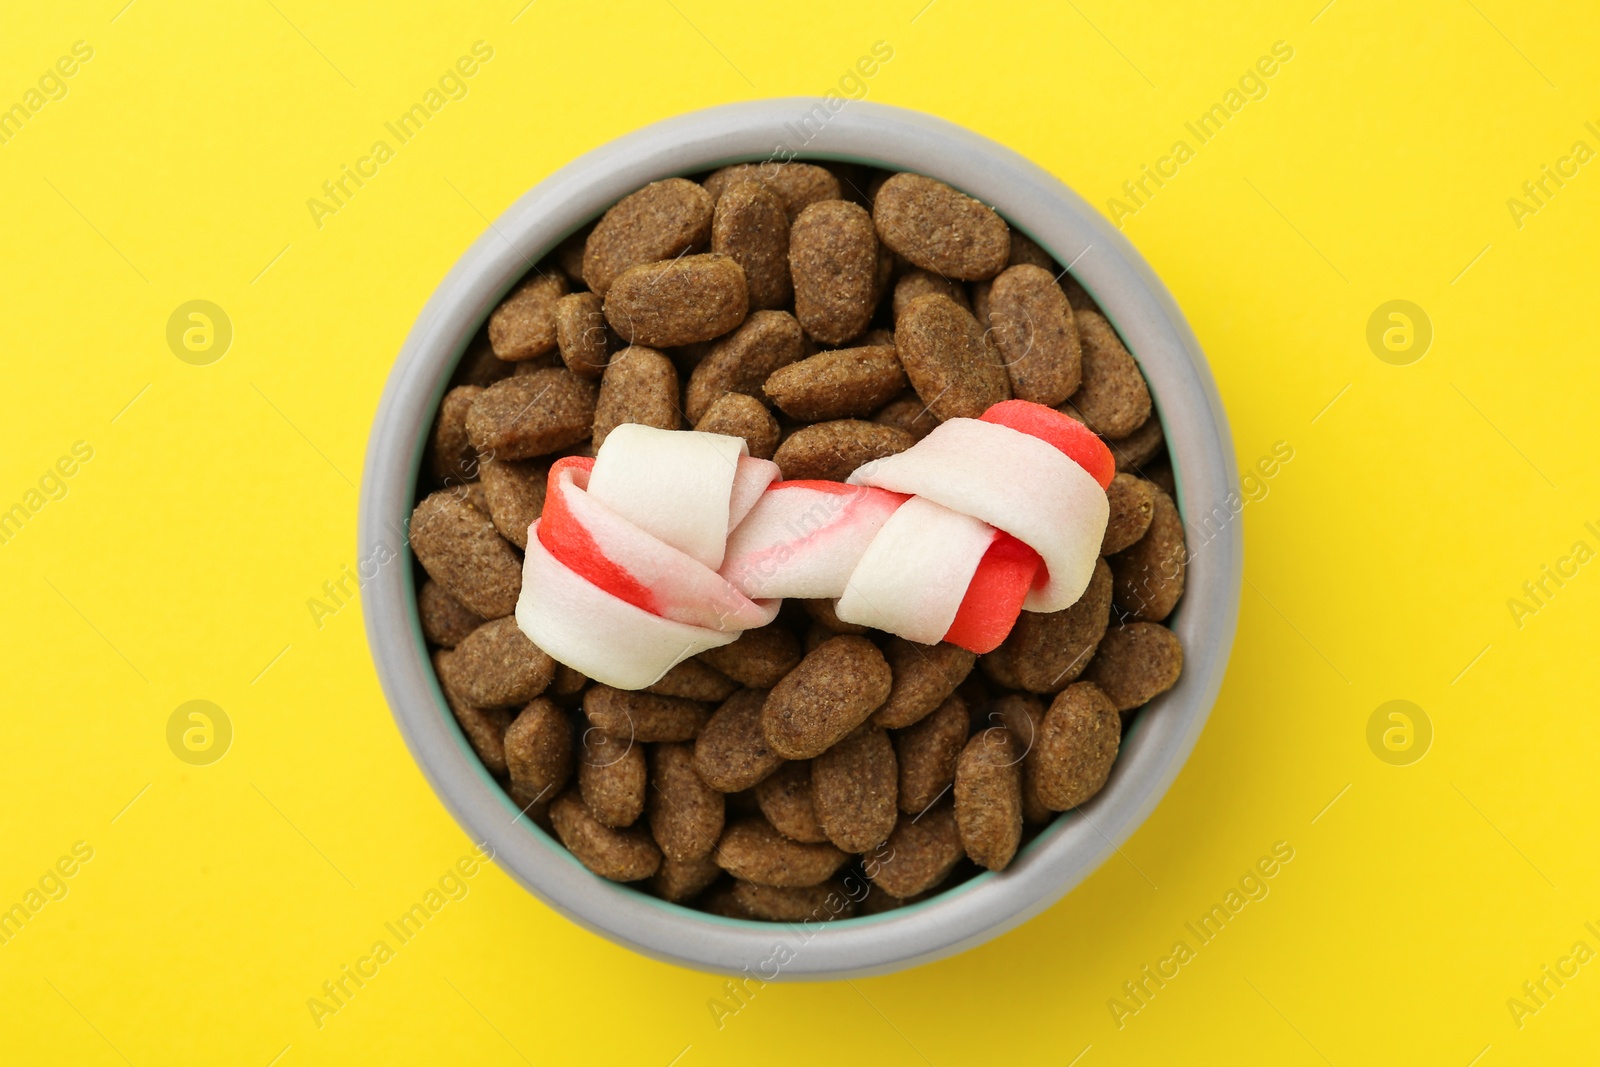 Photo of Chew bone and dry dog food on yellow background, top view